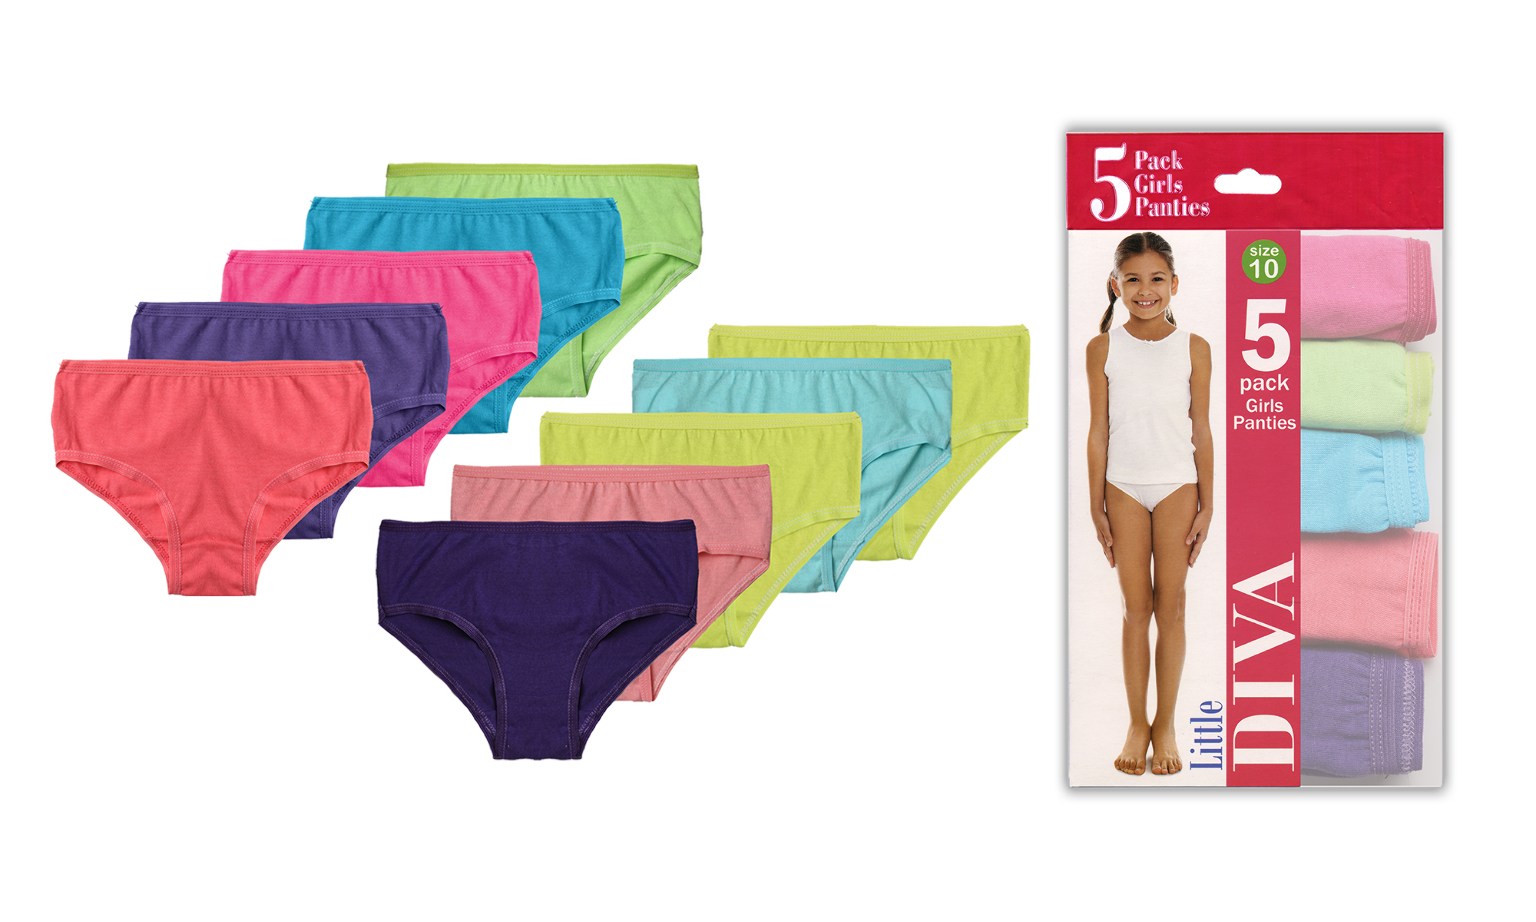 Girl's Panties - 5 Pack, Solid Colors, Size 4-14